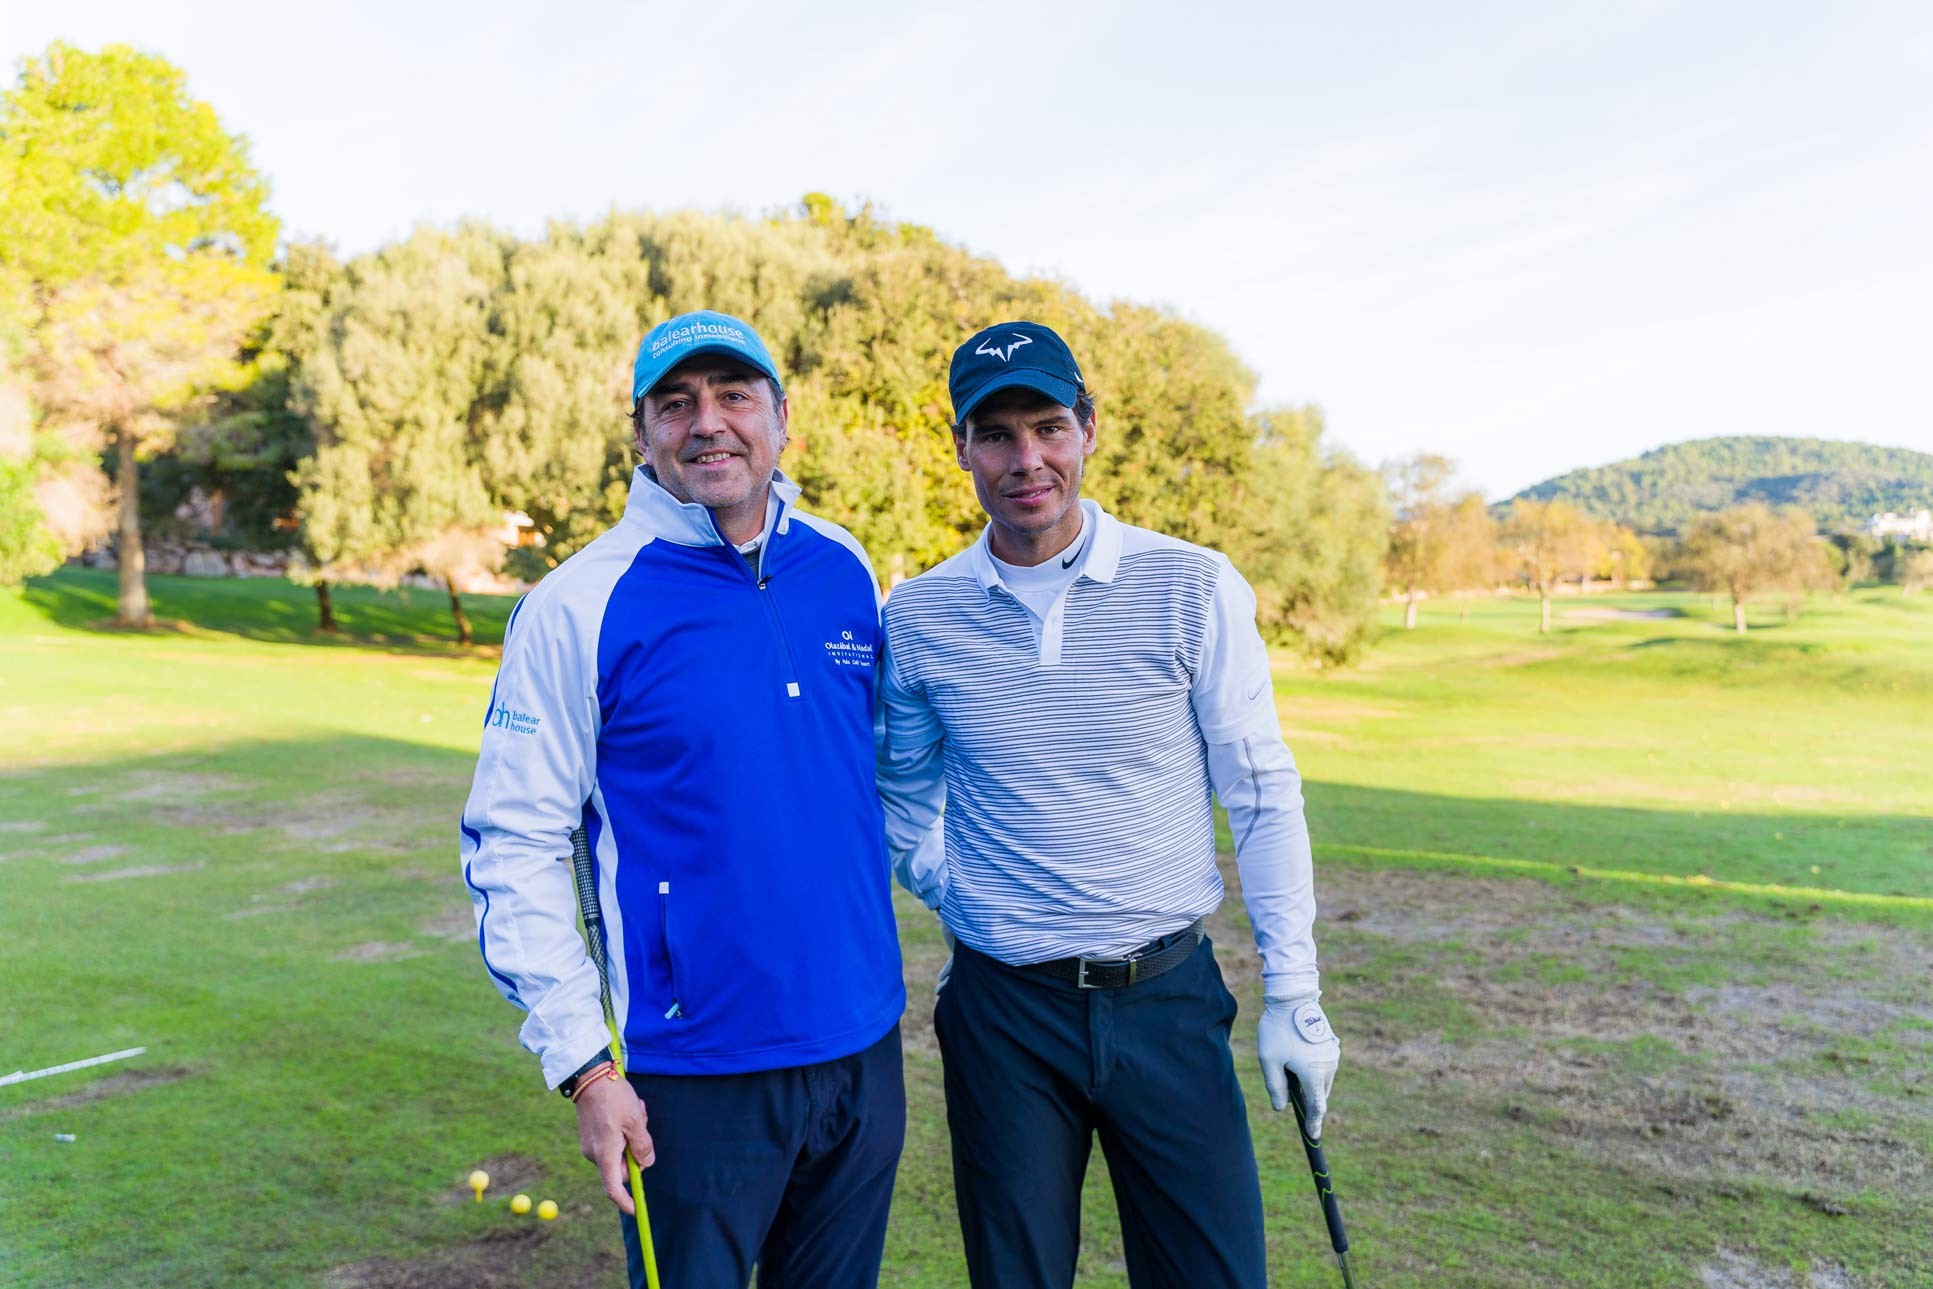 Balearhouse joined the VI edition of the Olazábal & Nadal Golf Tournament by Pula Golf Resort, where sport and gastronomy came together for a worthy cause.